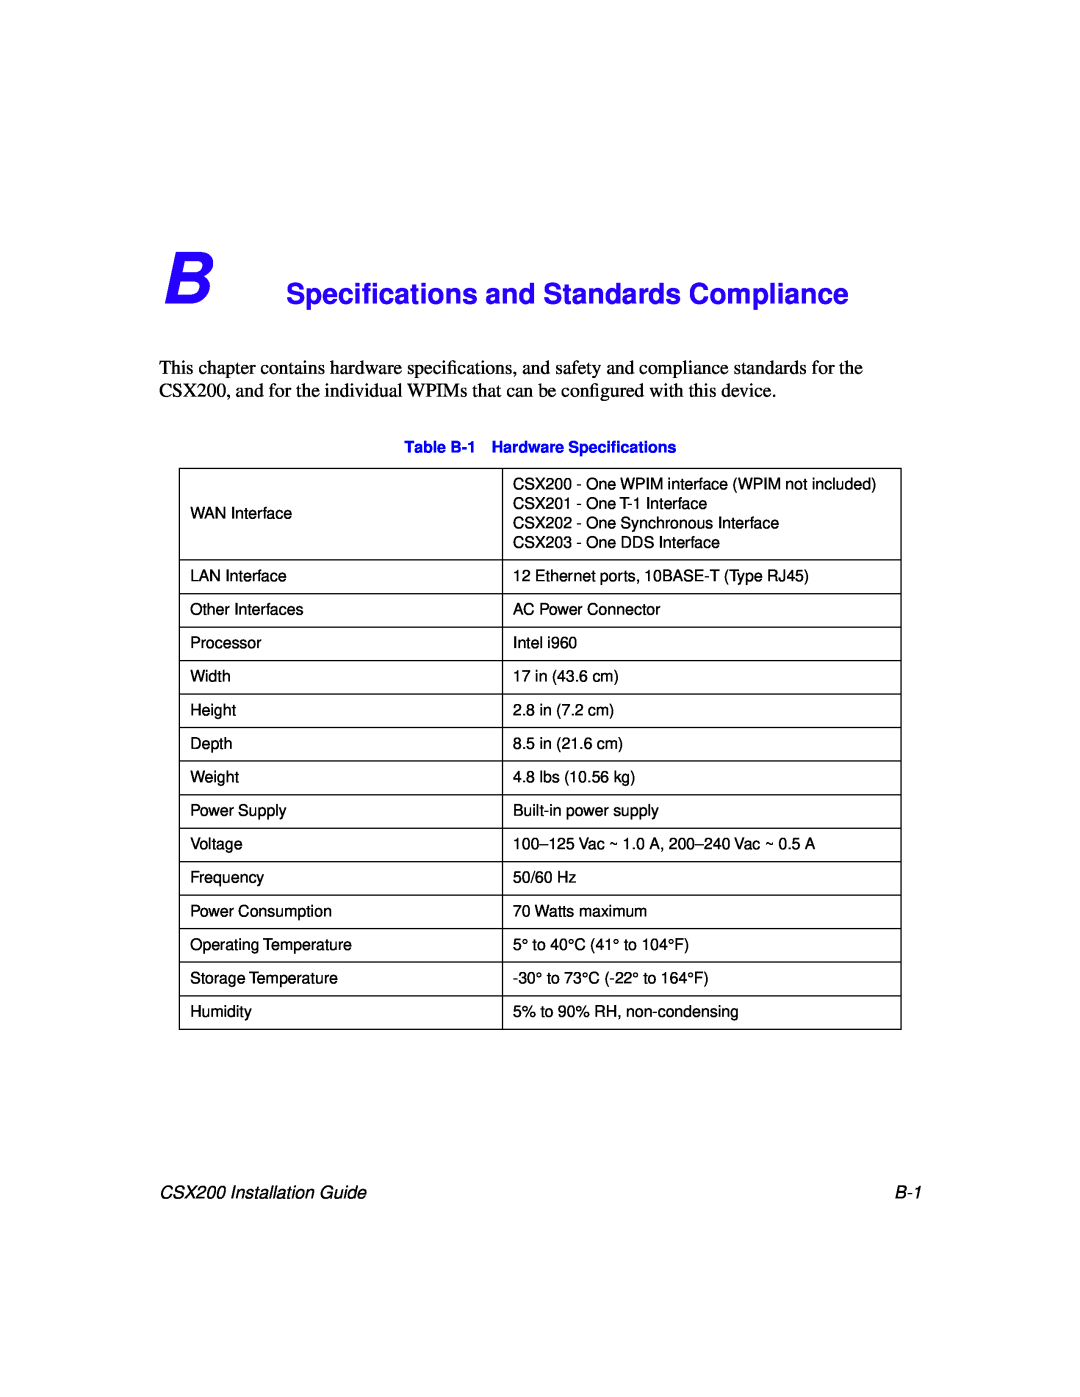 Cabletron Systems manual B Speciﬁcations and Standards Compliance, CSX200 Installation Guide 